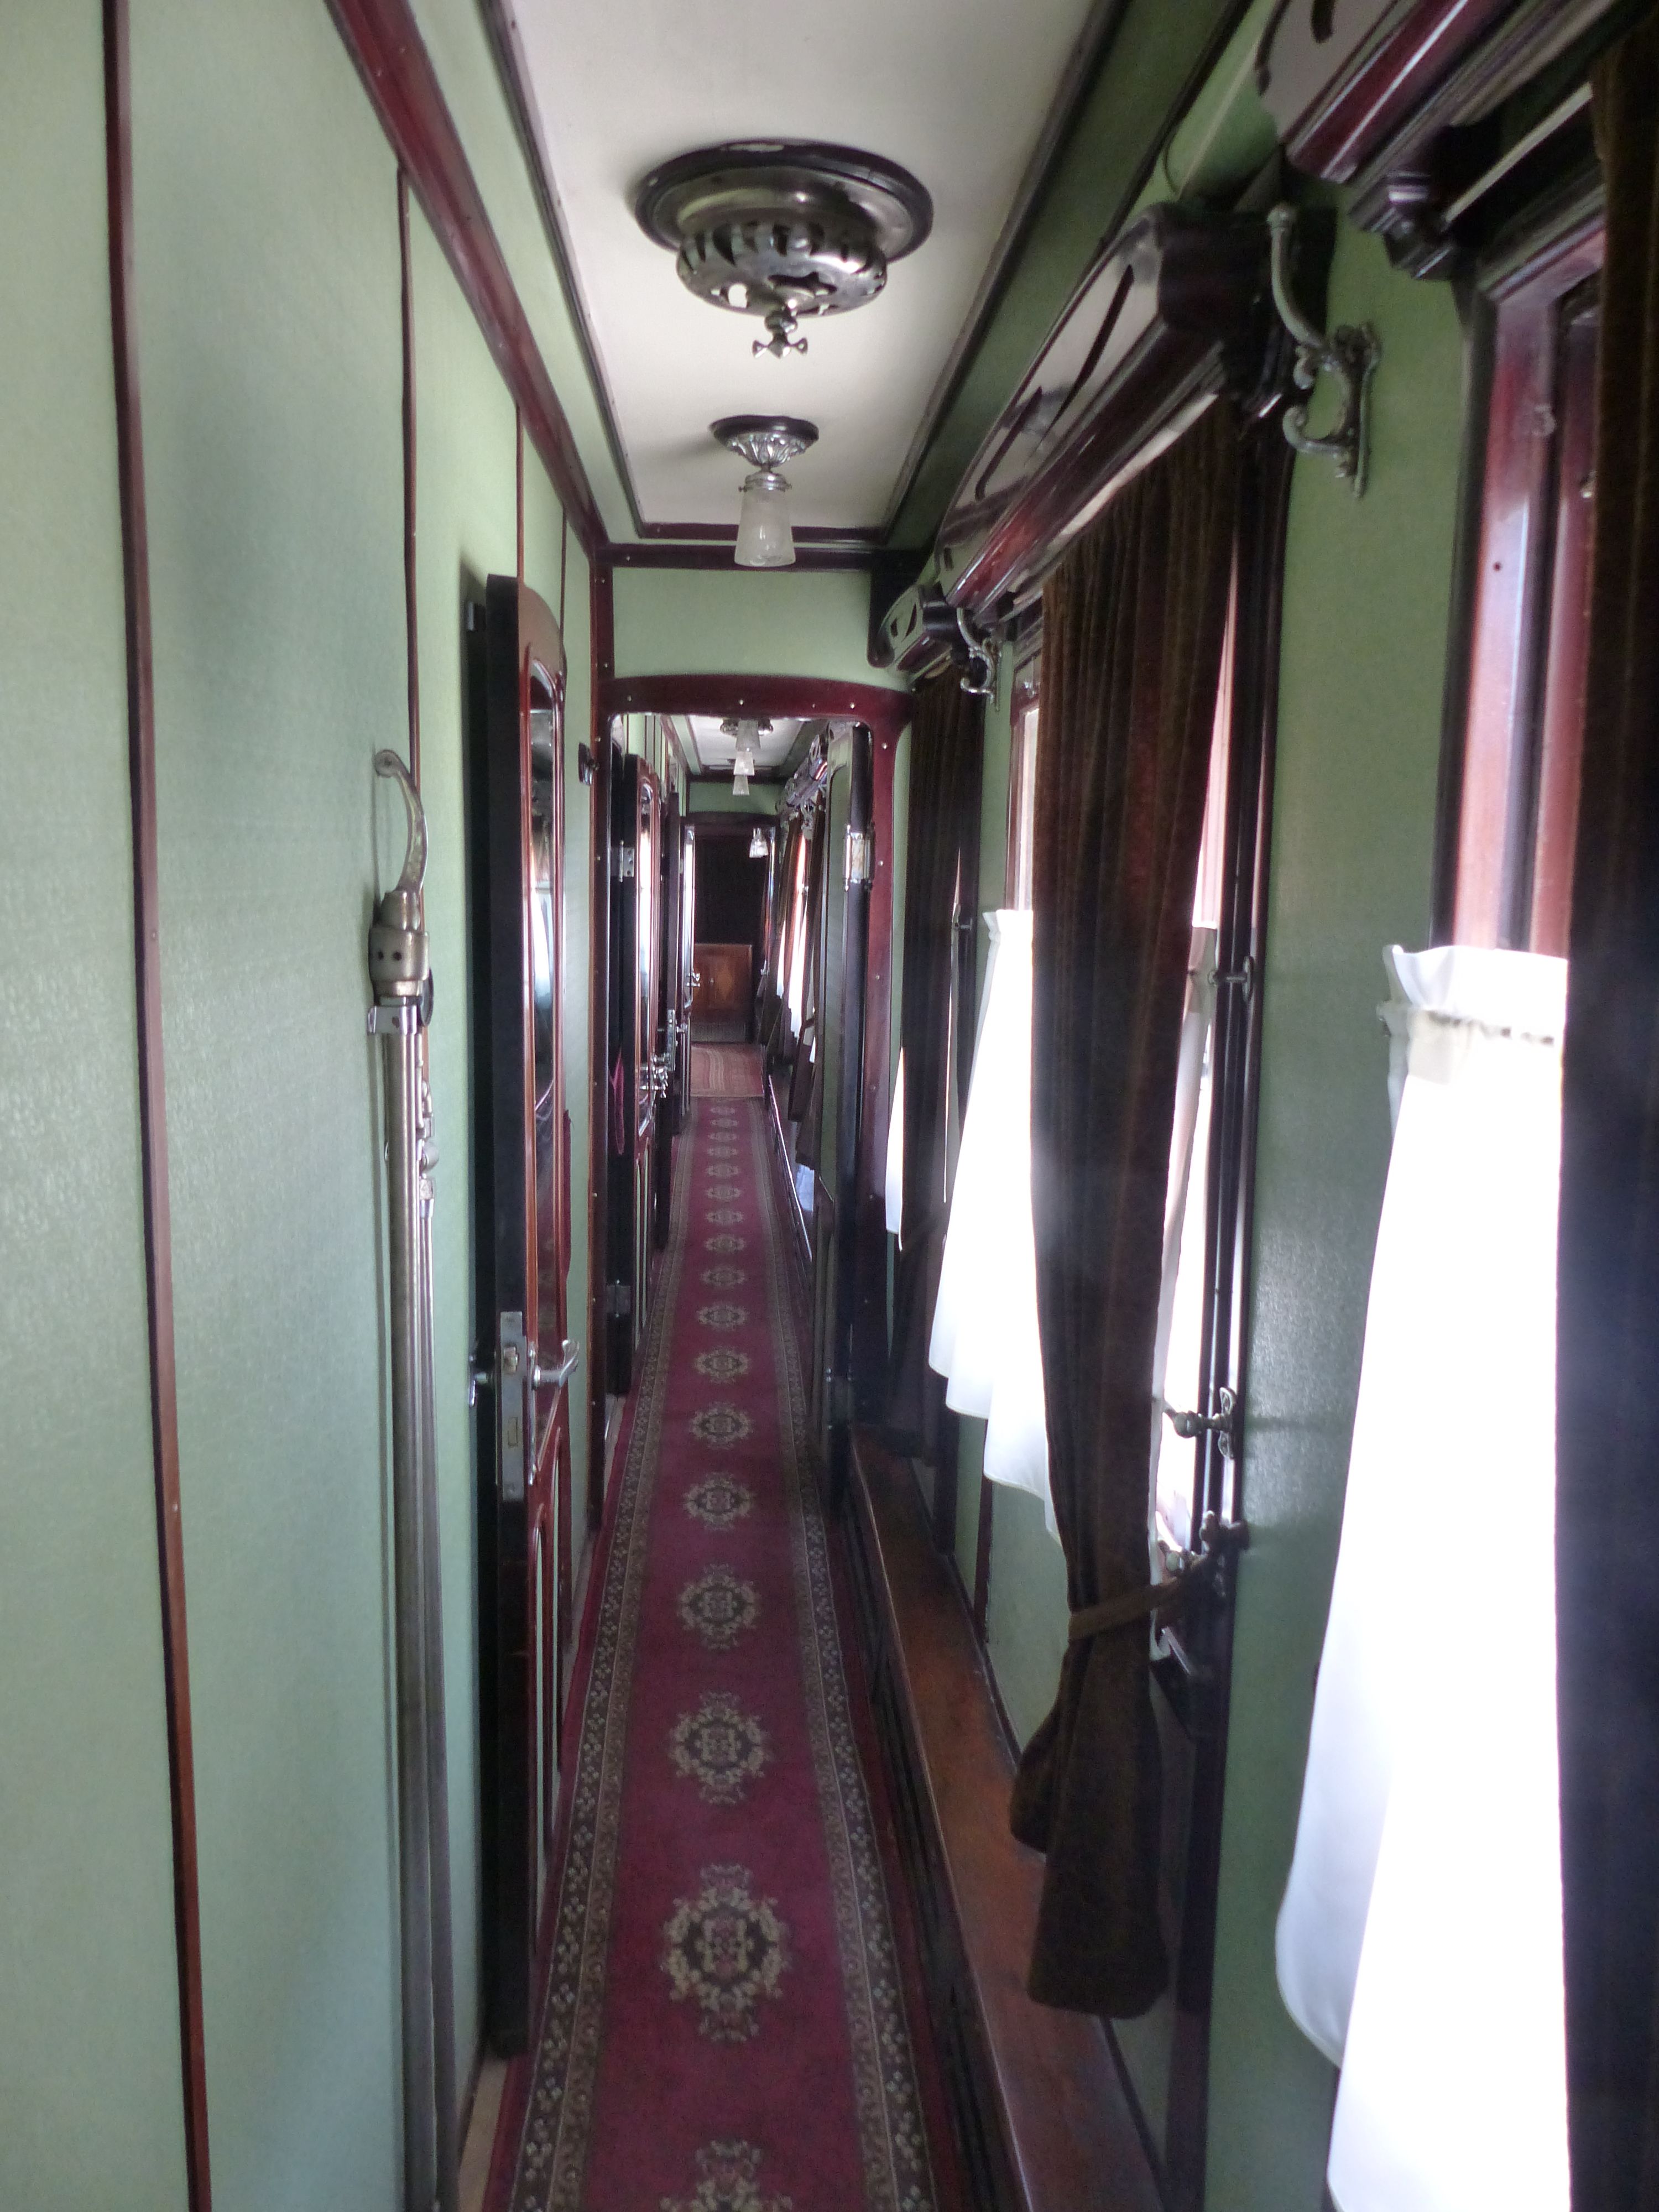 Stalin's private train carriage, at the Stalin museum, Gori